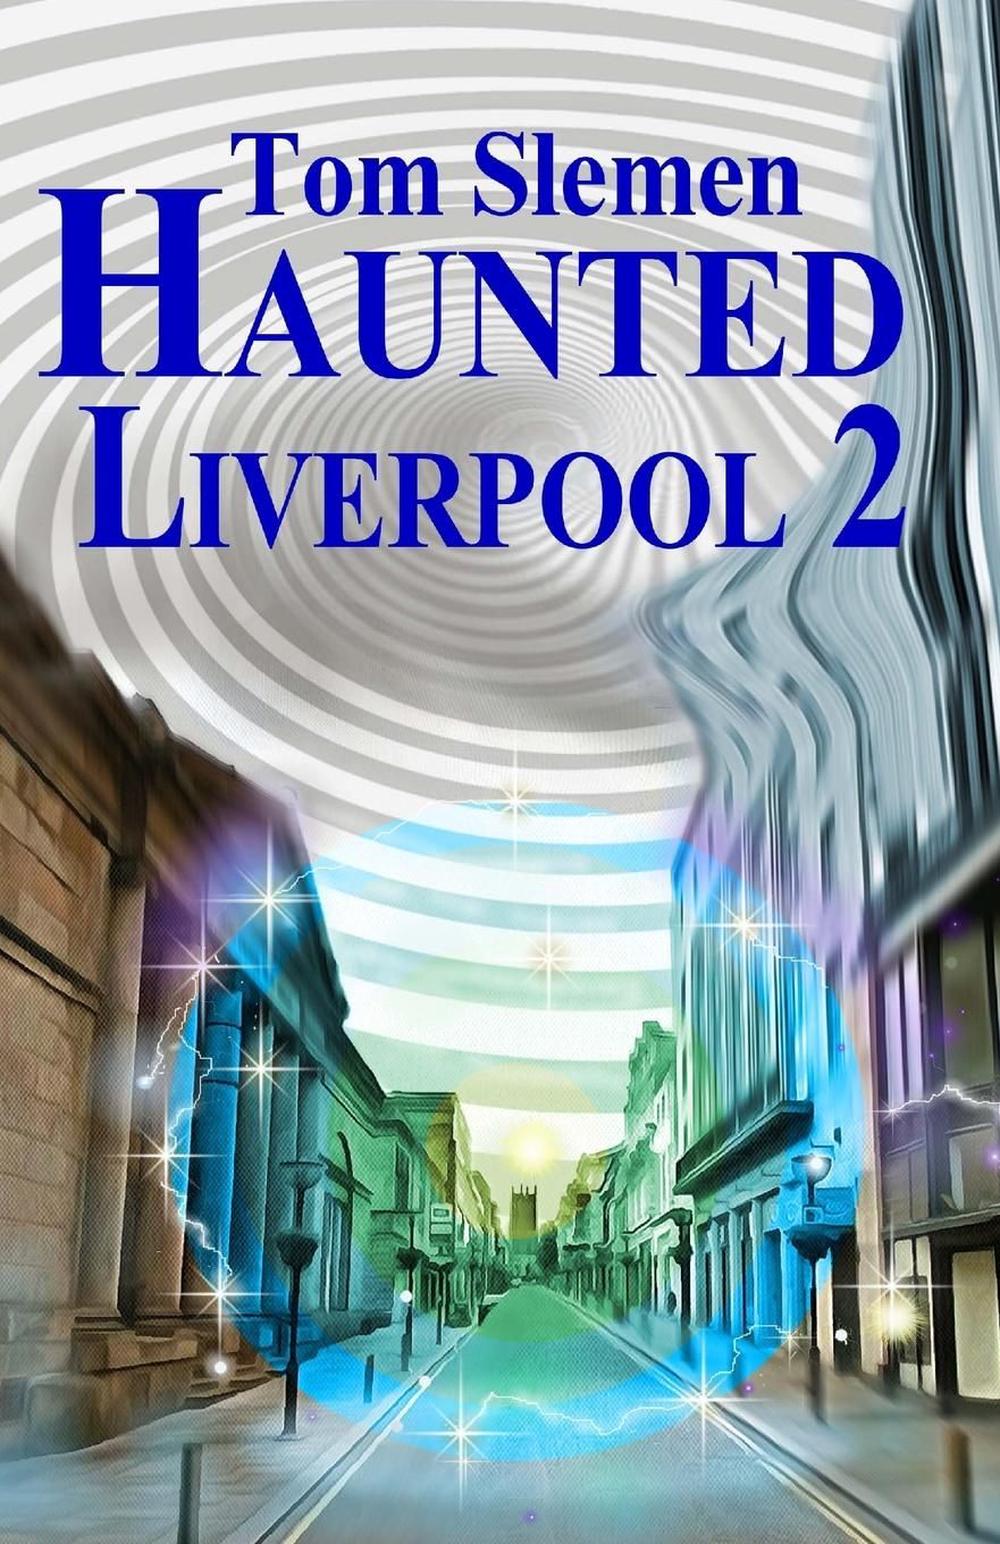 Haunted Liverpool 2 by Tom Slemen (English) Paperback Book Free